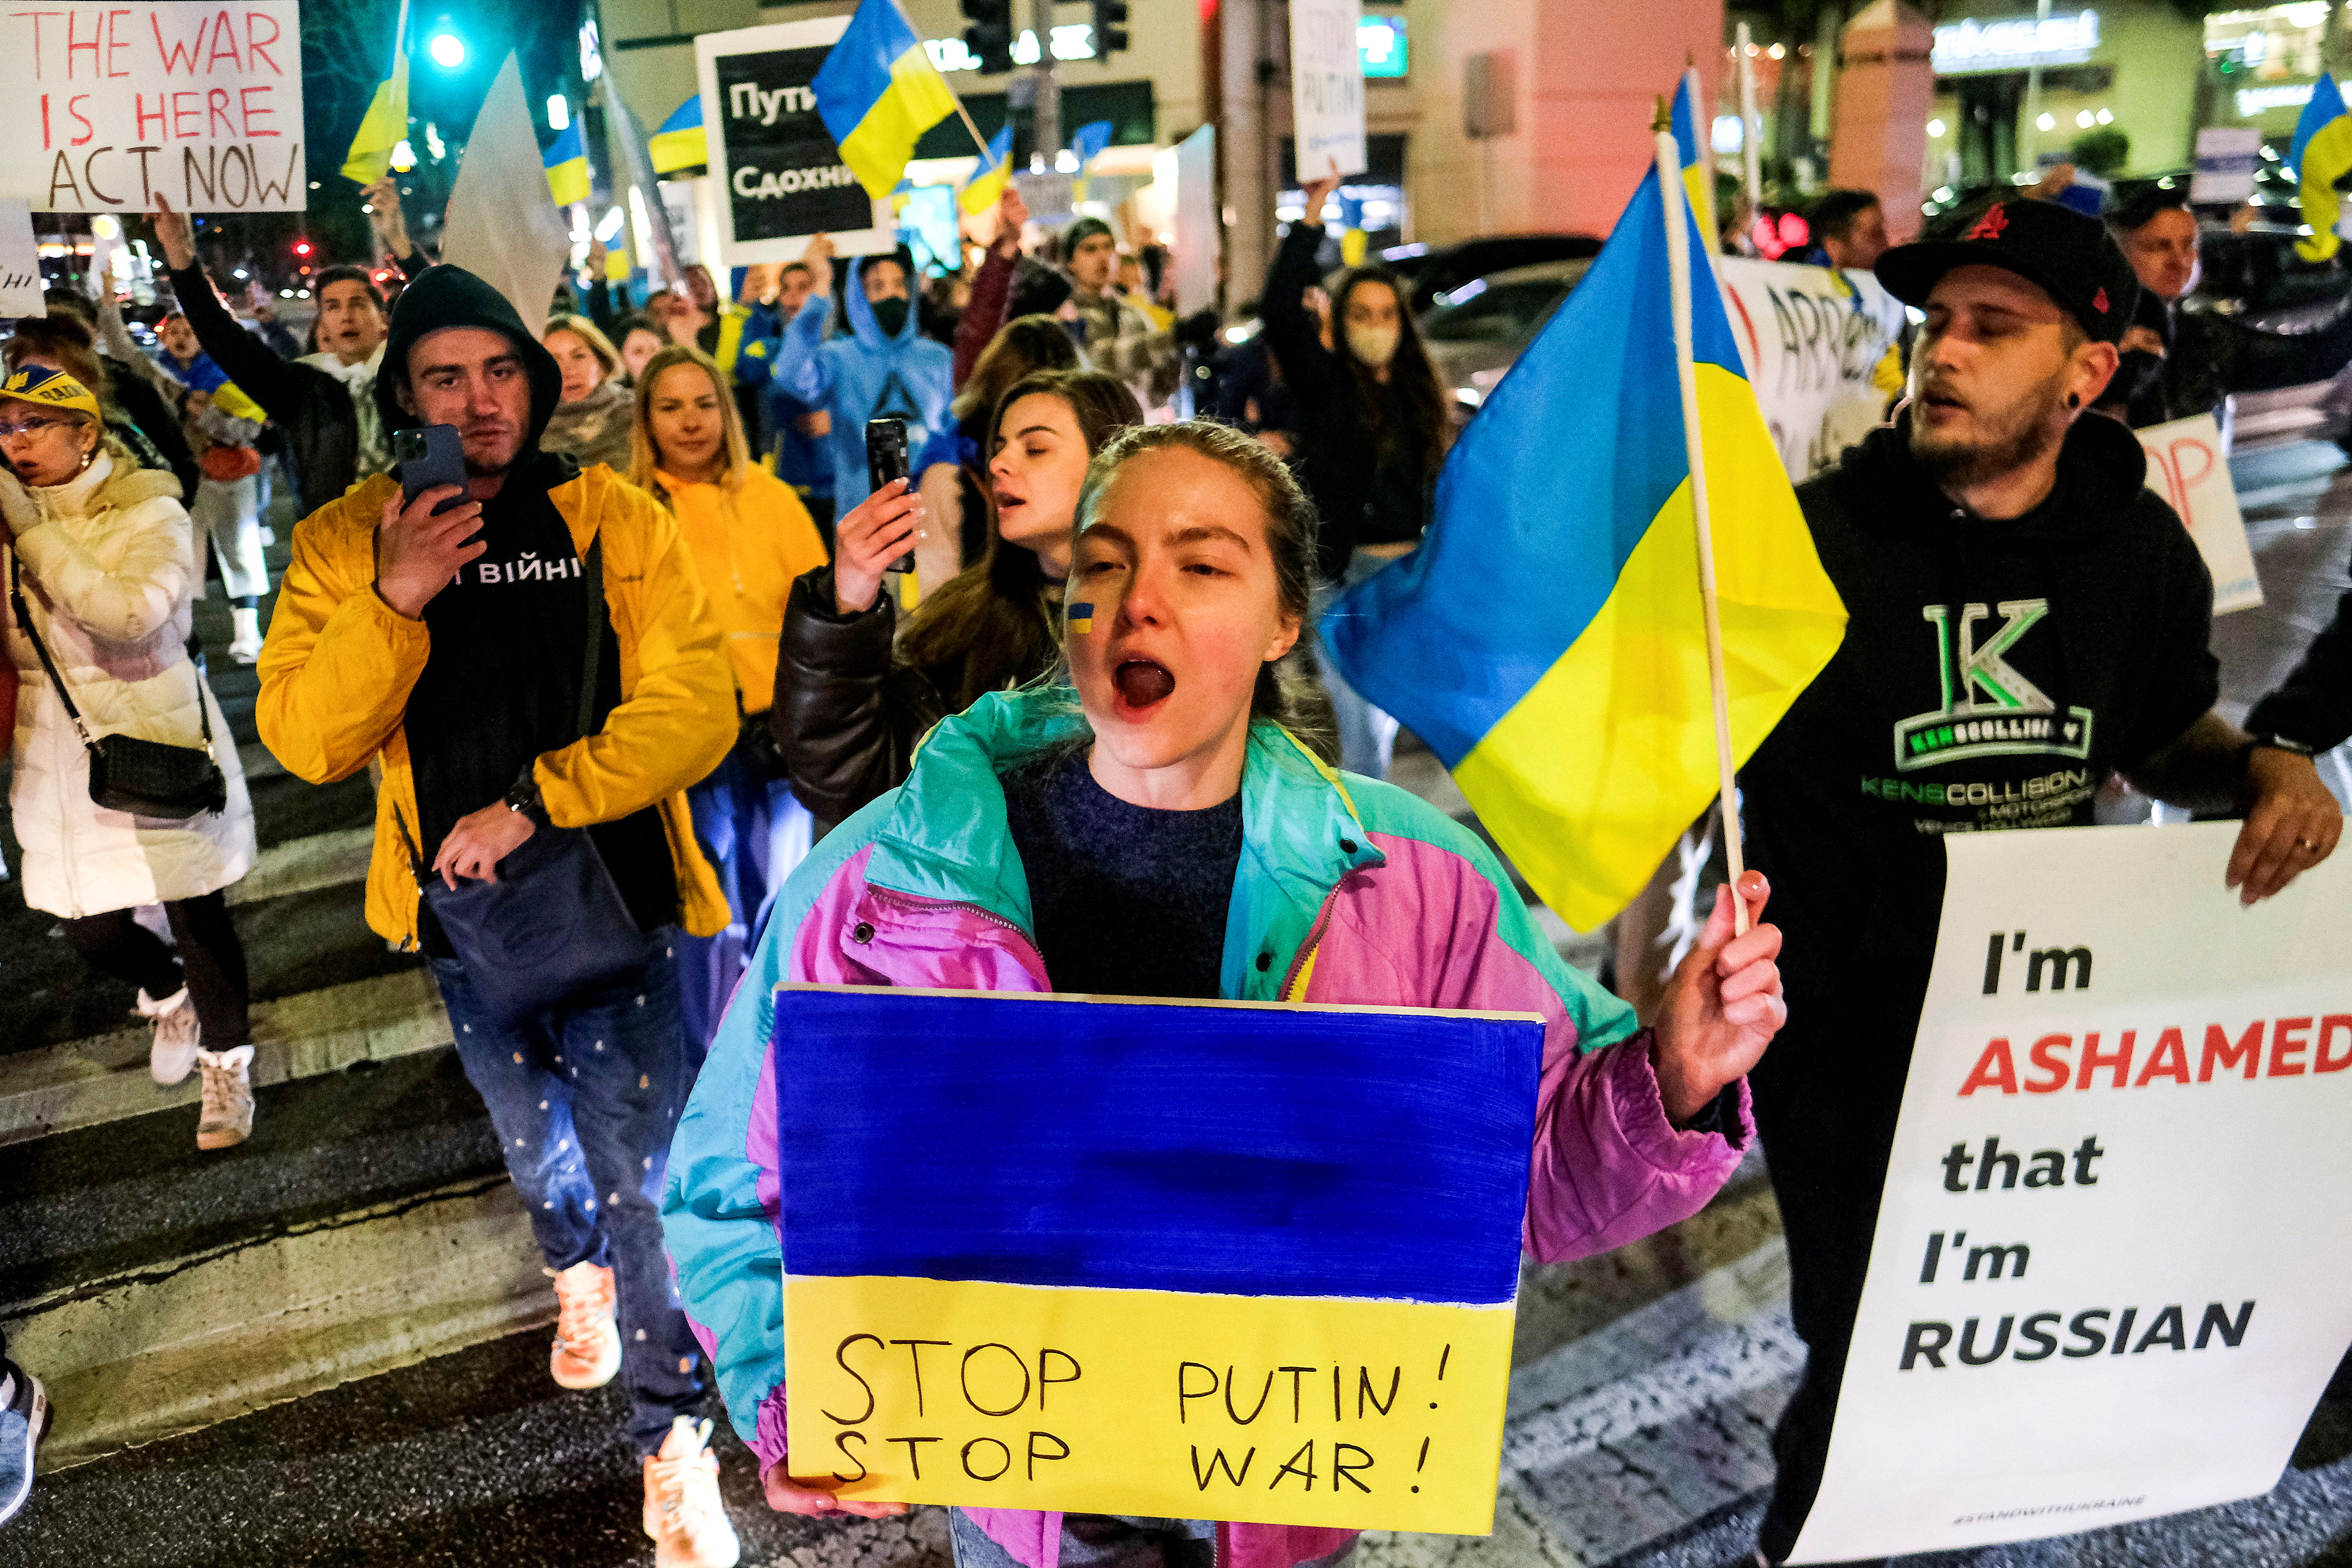 Members of the Russian community demonstrate against the Russian invasion of Ukraine in Los Angeles